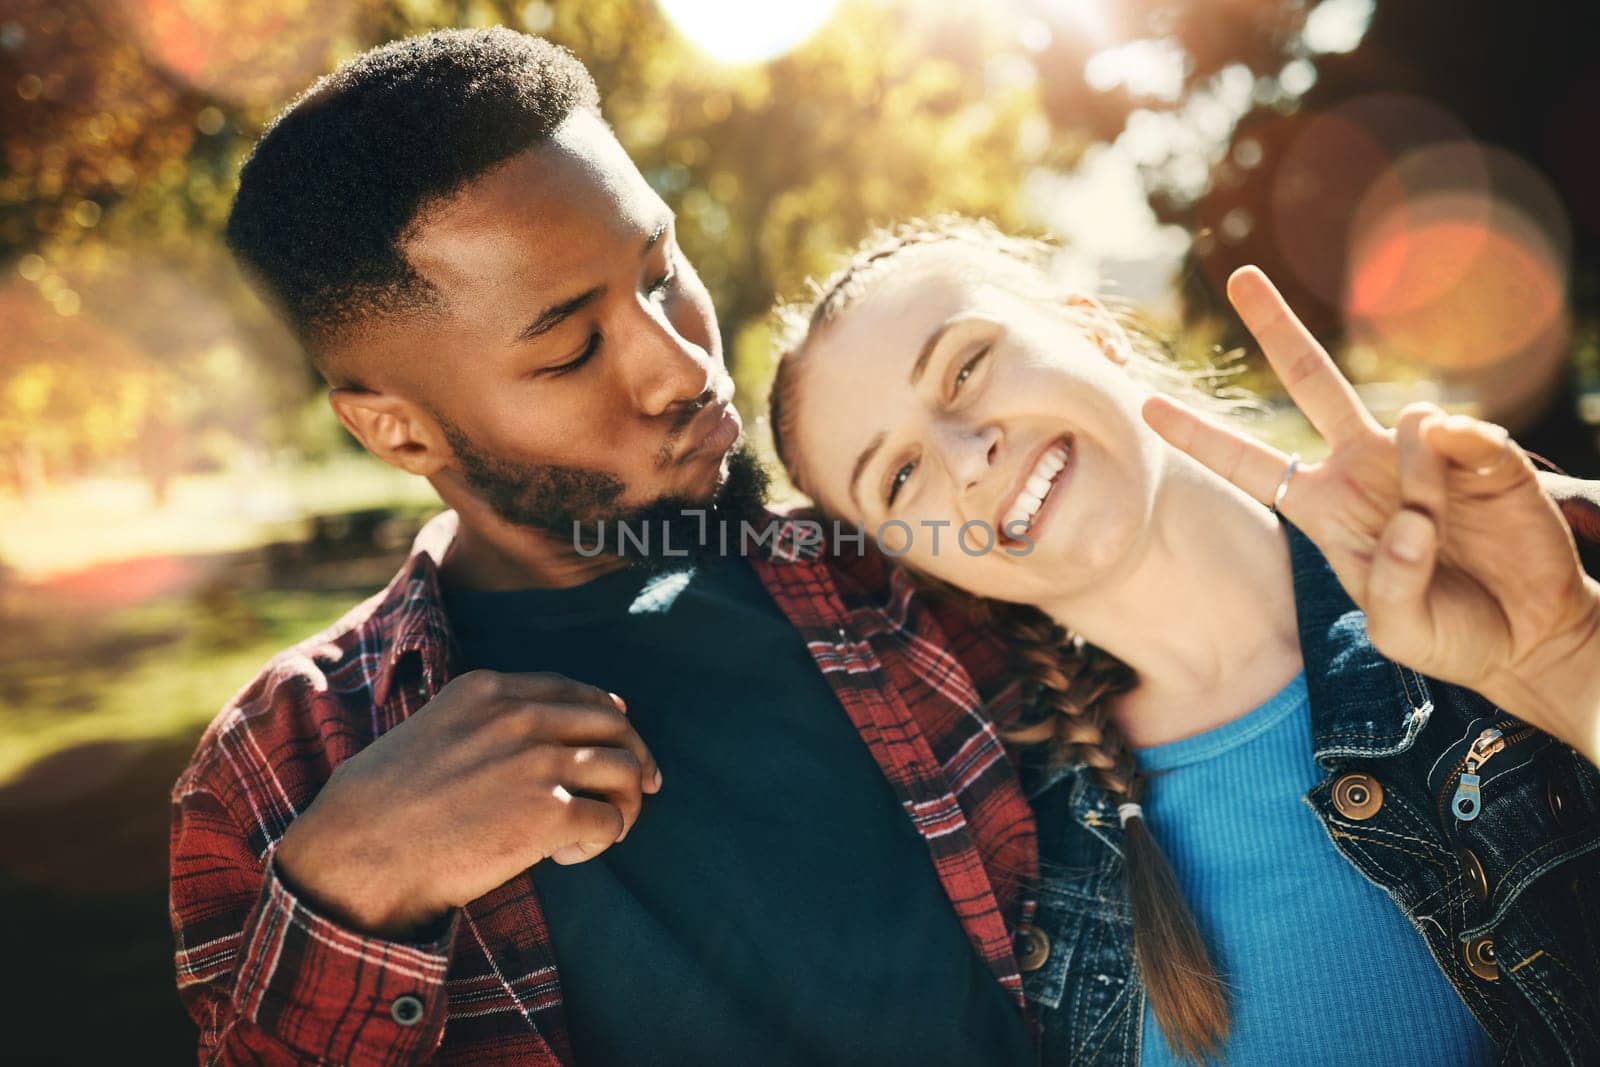 Couple, selfie peace sign and portrait smile outdoors, enjoying fun time and bonding at park. Interracial, love romance and black man and woman with v hand emoji for taking pictures for happy memory